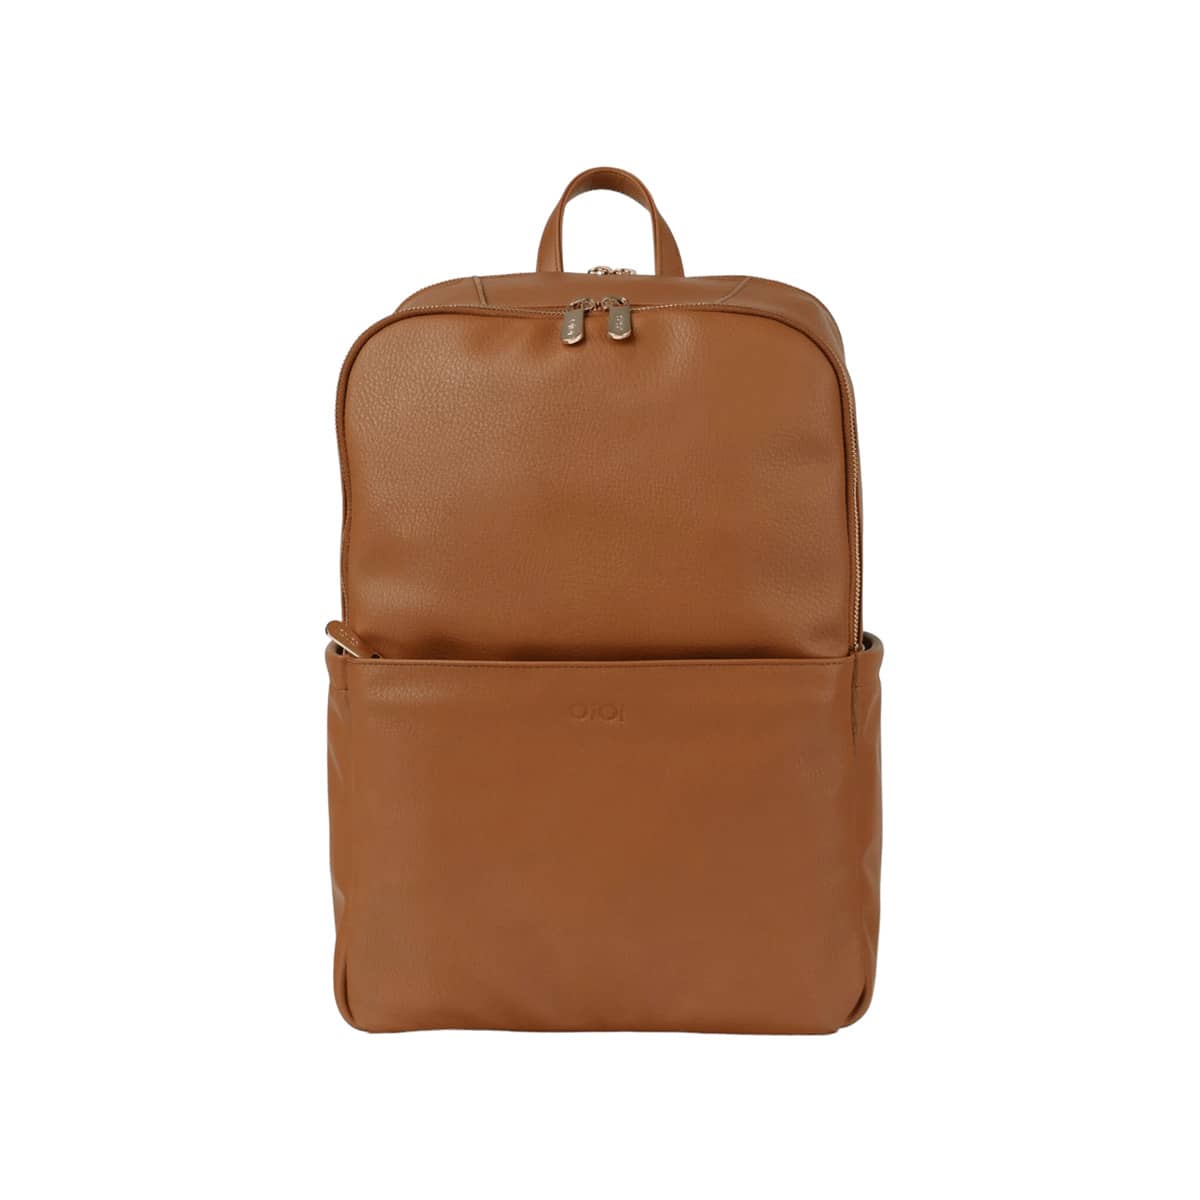 OiOi Faux Leather Multitasker Nappy Backpack - Chestnut